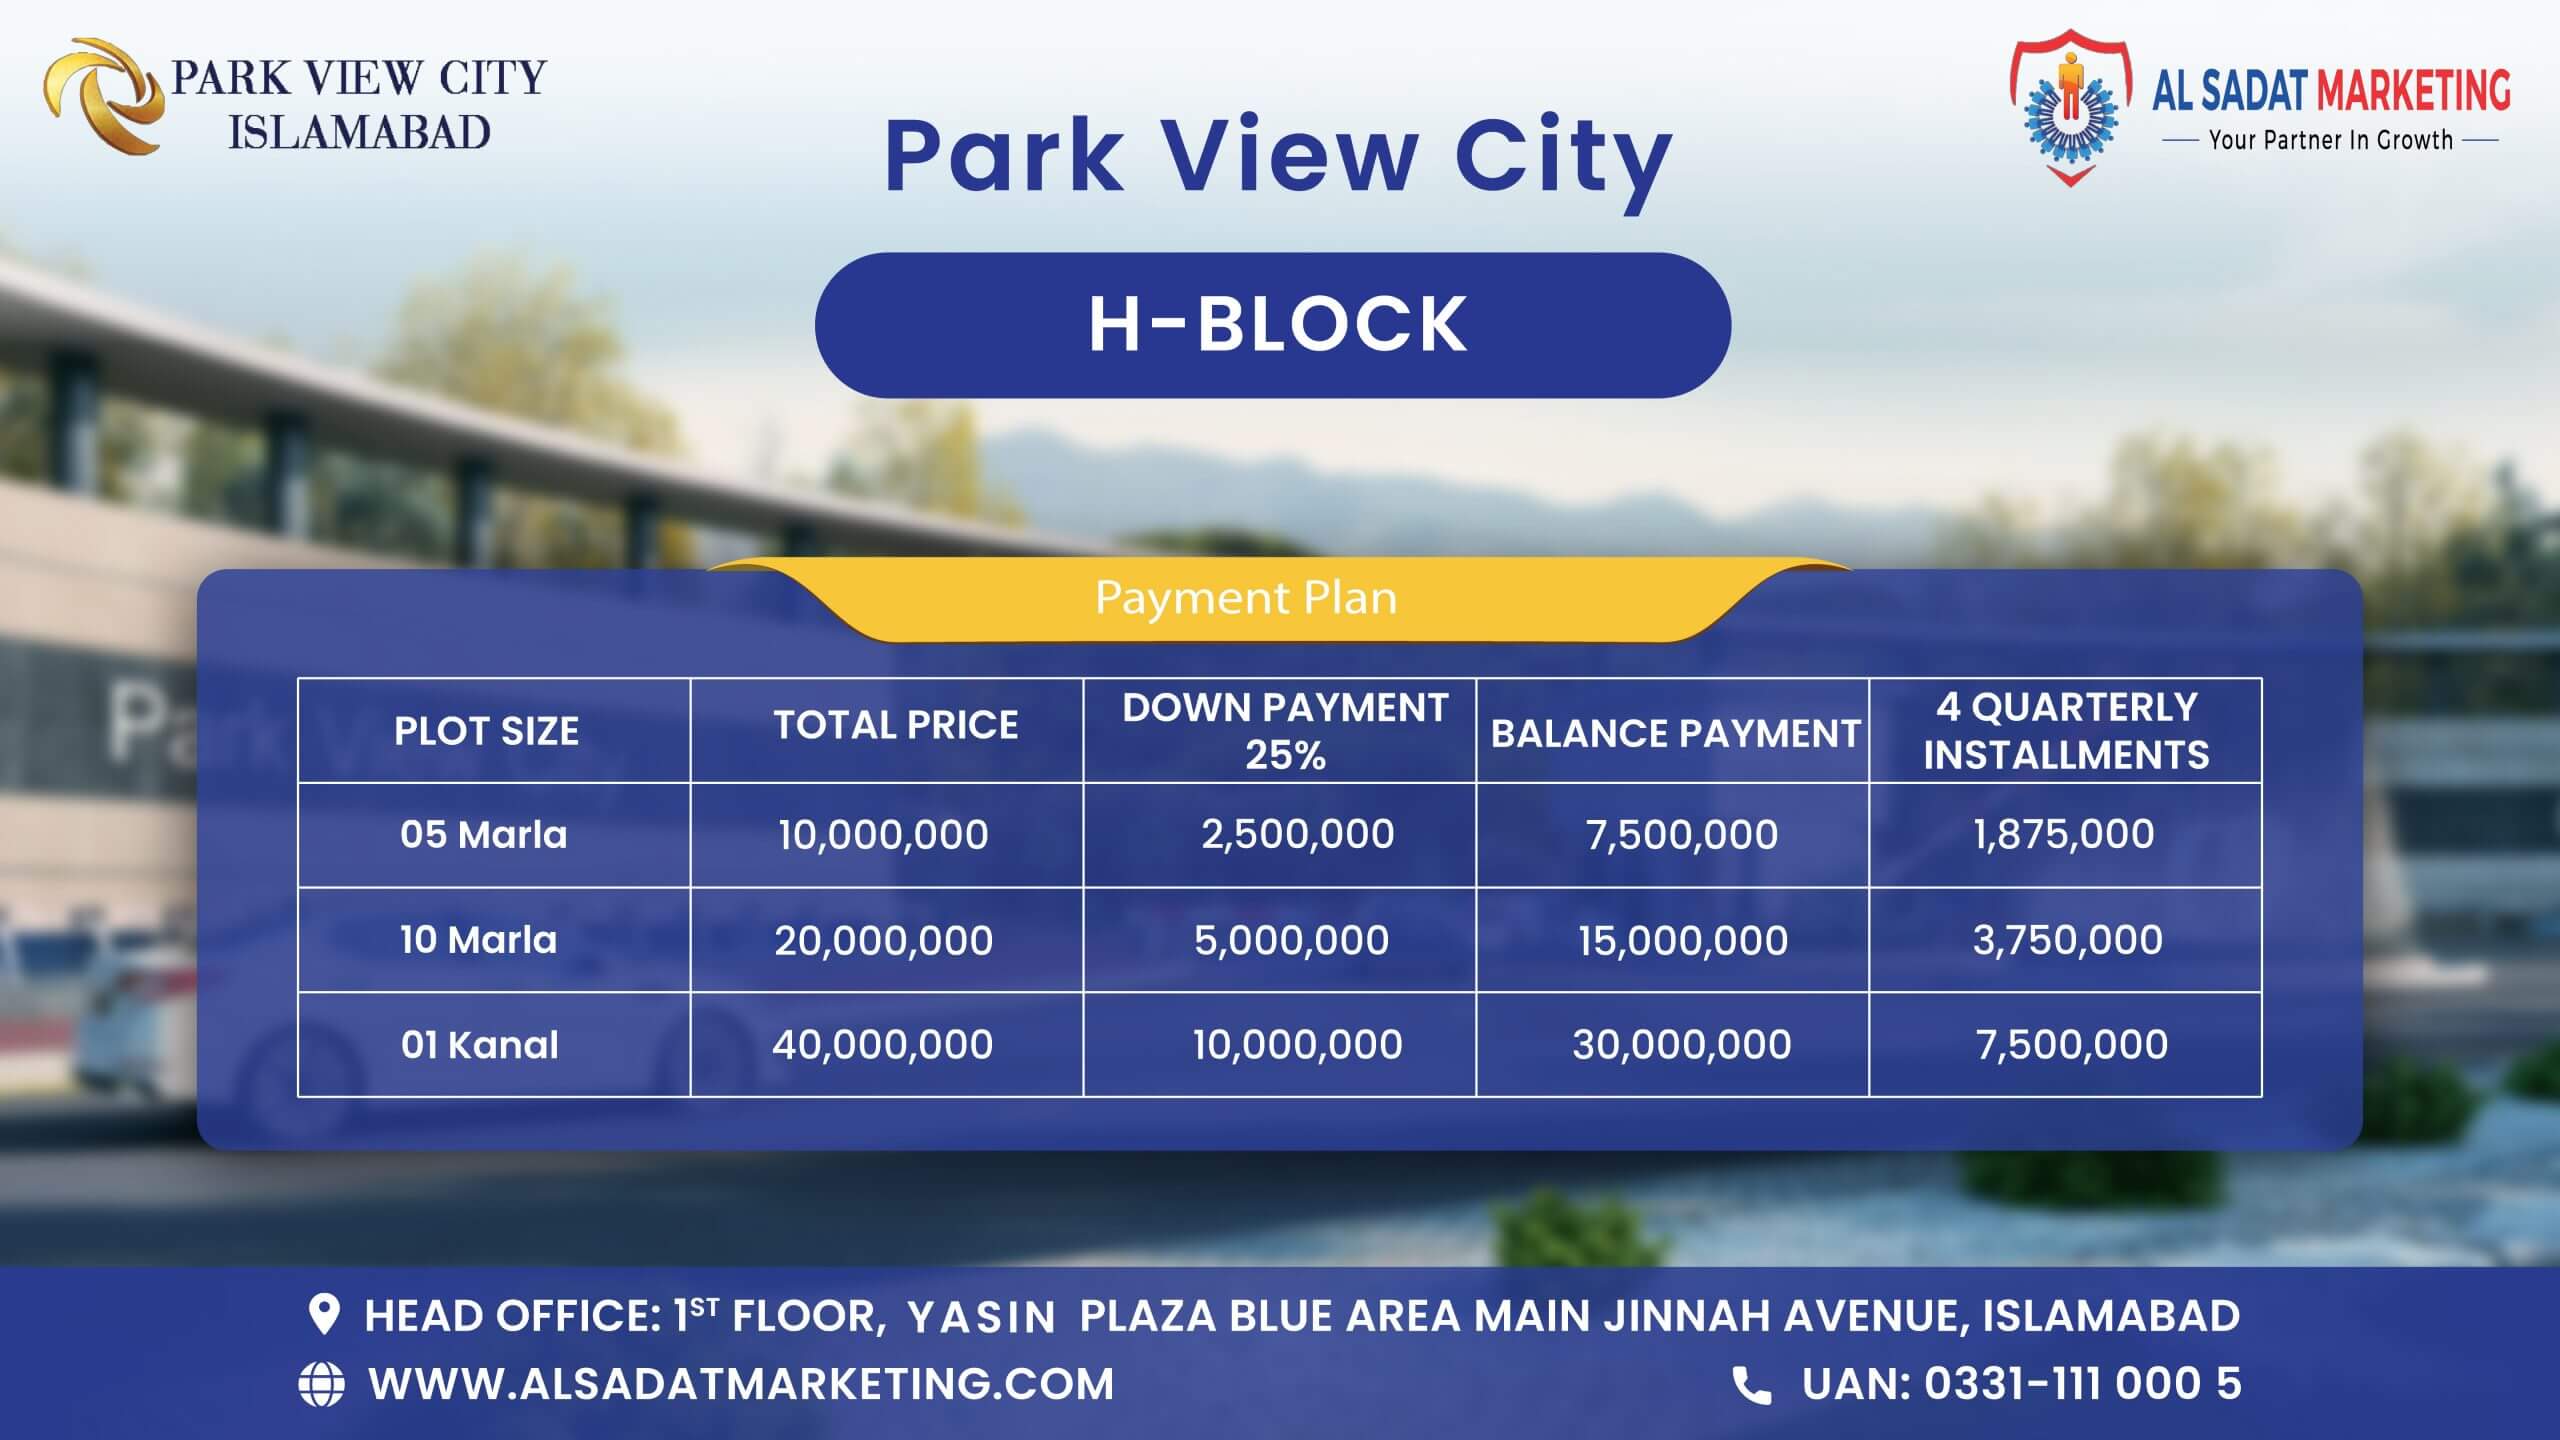 park view city islamabad h block payment plan - park view city h block payment plan - park view city islamabad h block residential plots payment plan - park view city h block residential plots payment plan - park view city islamabad payment plan - park view city payment plan - payment plan of park view city islamabad – payment plan of park view city – park view city islamabad – park view city – park view city housing society - park view city islamabad housing society – park view city real estate project - park view city islamabad real estate project - al sadat marketing - alsadat marketing - al-sadat marketing